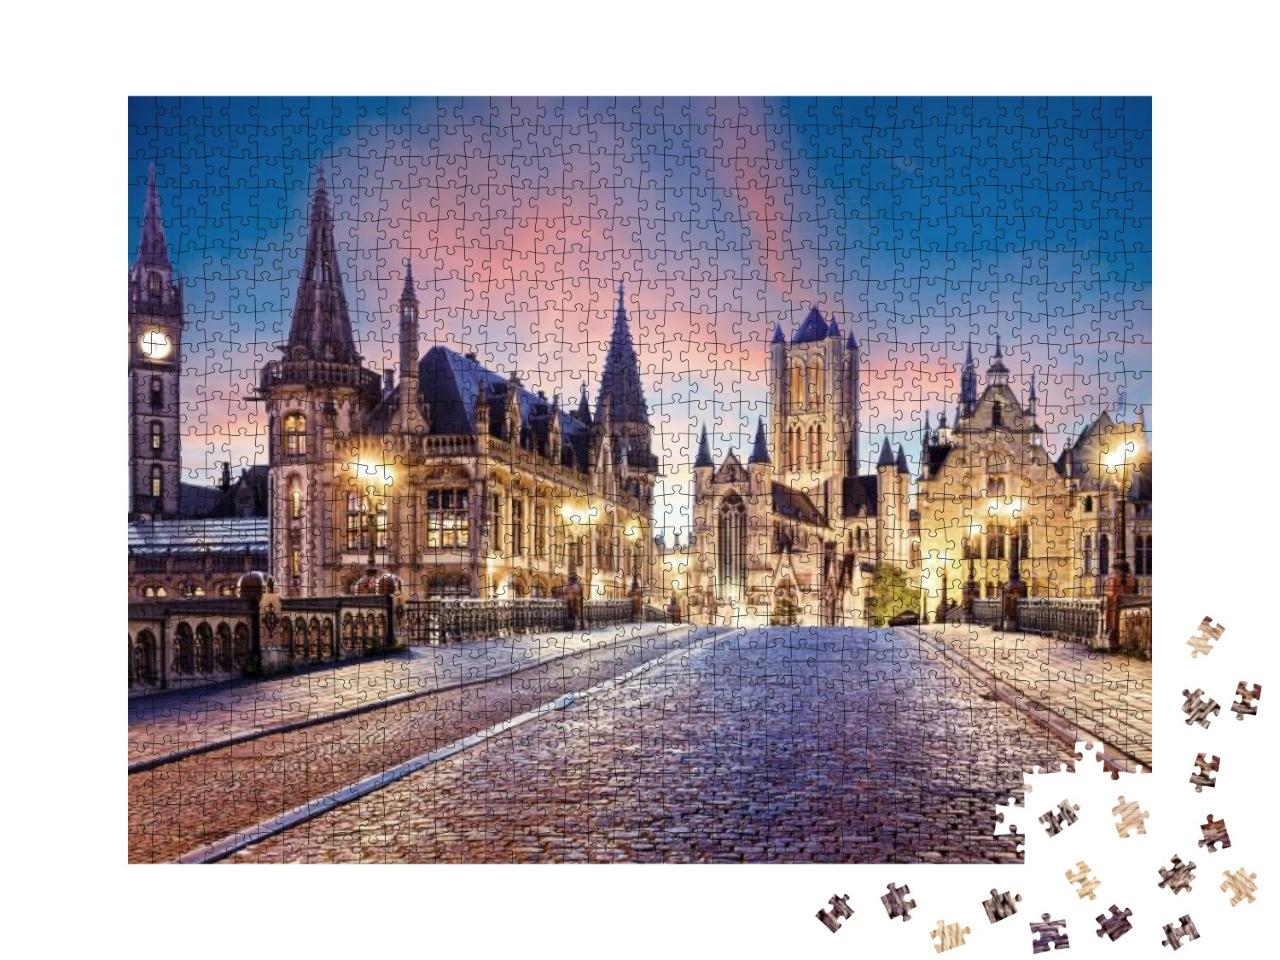 Belgium Historic City Ghent At Sunset... Jigsaw Puzzle with 1000 pieces